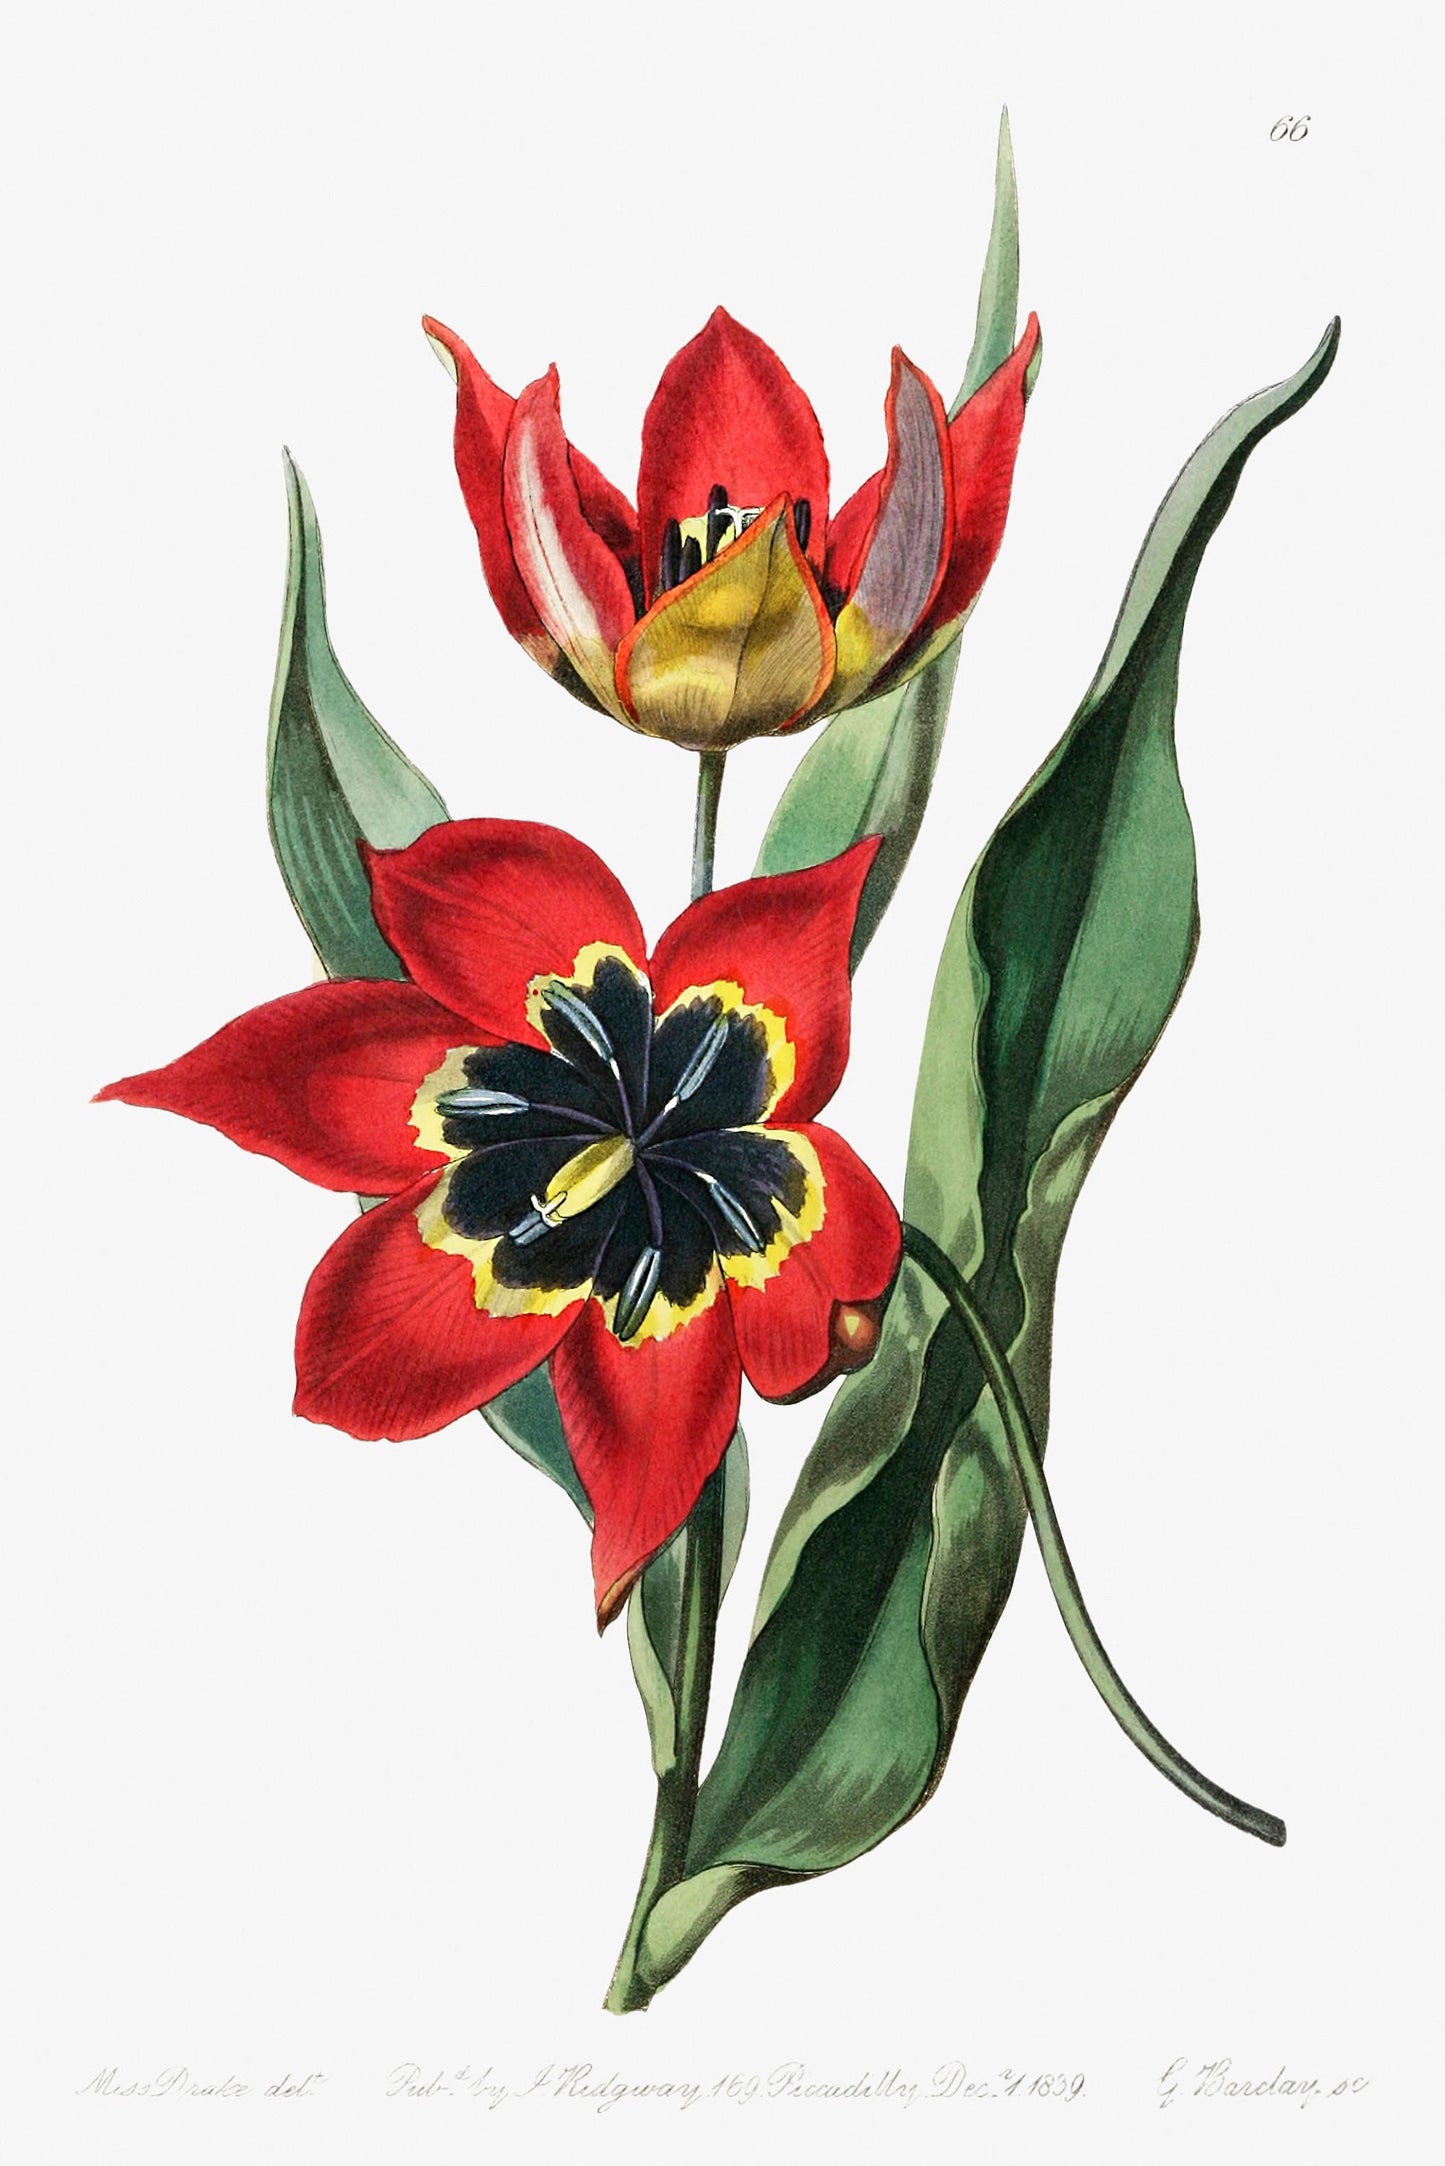 Strong smelling tulip Flower Illustration Poster Print Wall Hanging Decor A4 A3 A2